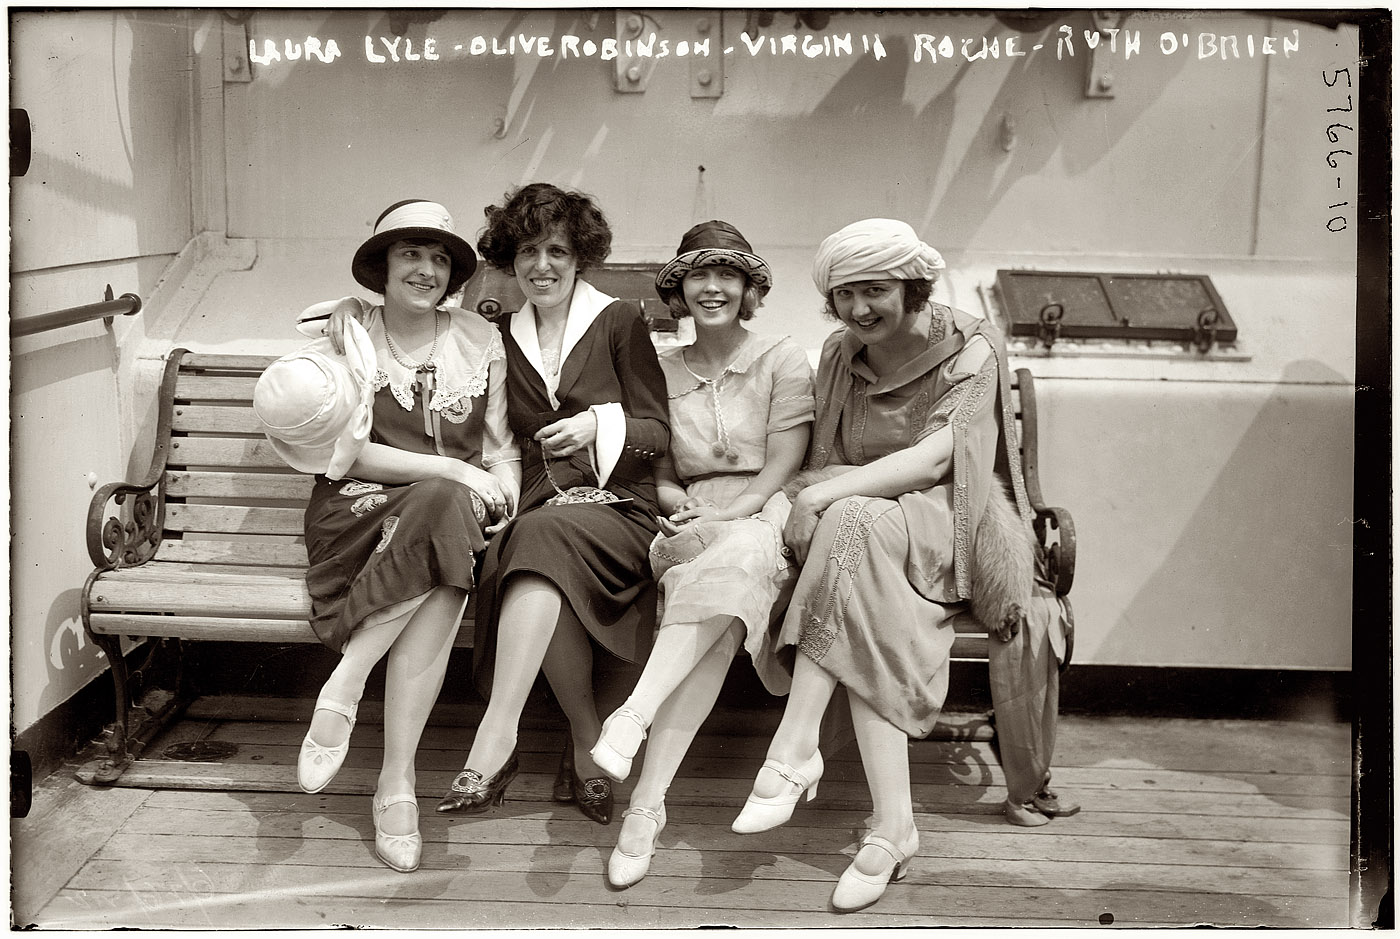 June 26, 1922. "Laura Lyle, Olive Robinson, Virginia Roche, Ruth O'Brien" aboard a ship. 5x7 glass negative, George Grantham Bain Collection. View full size.